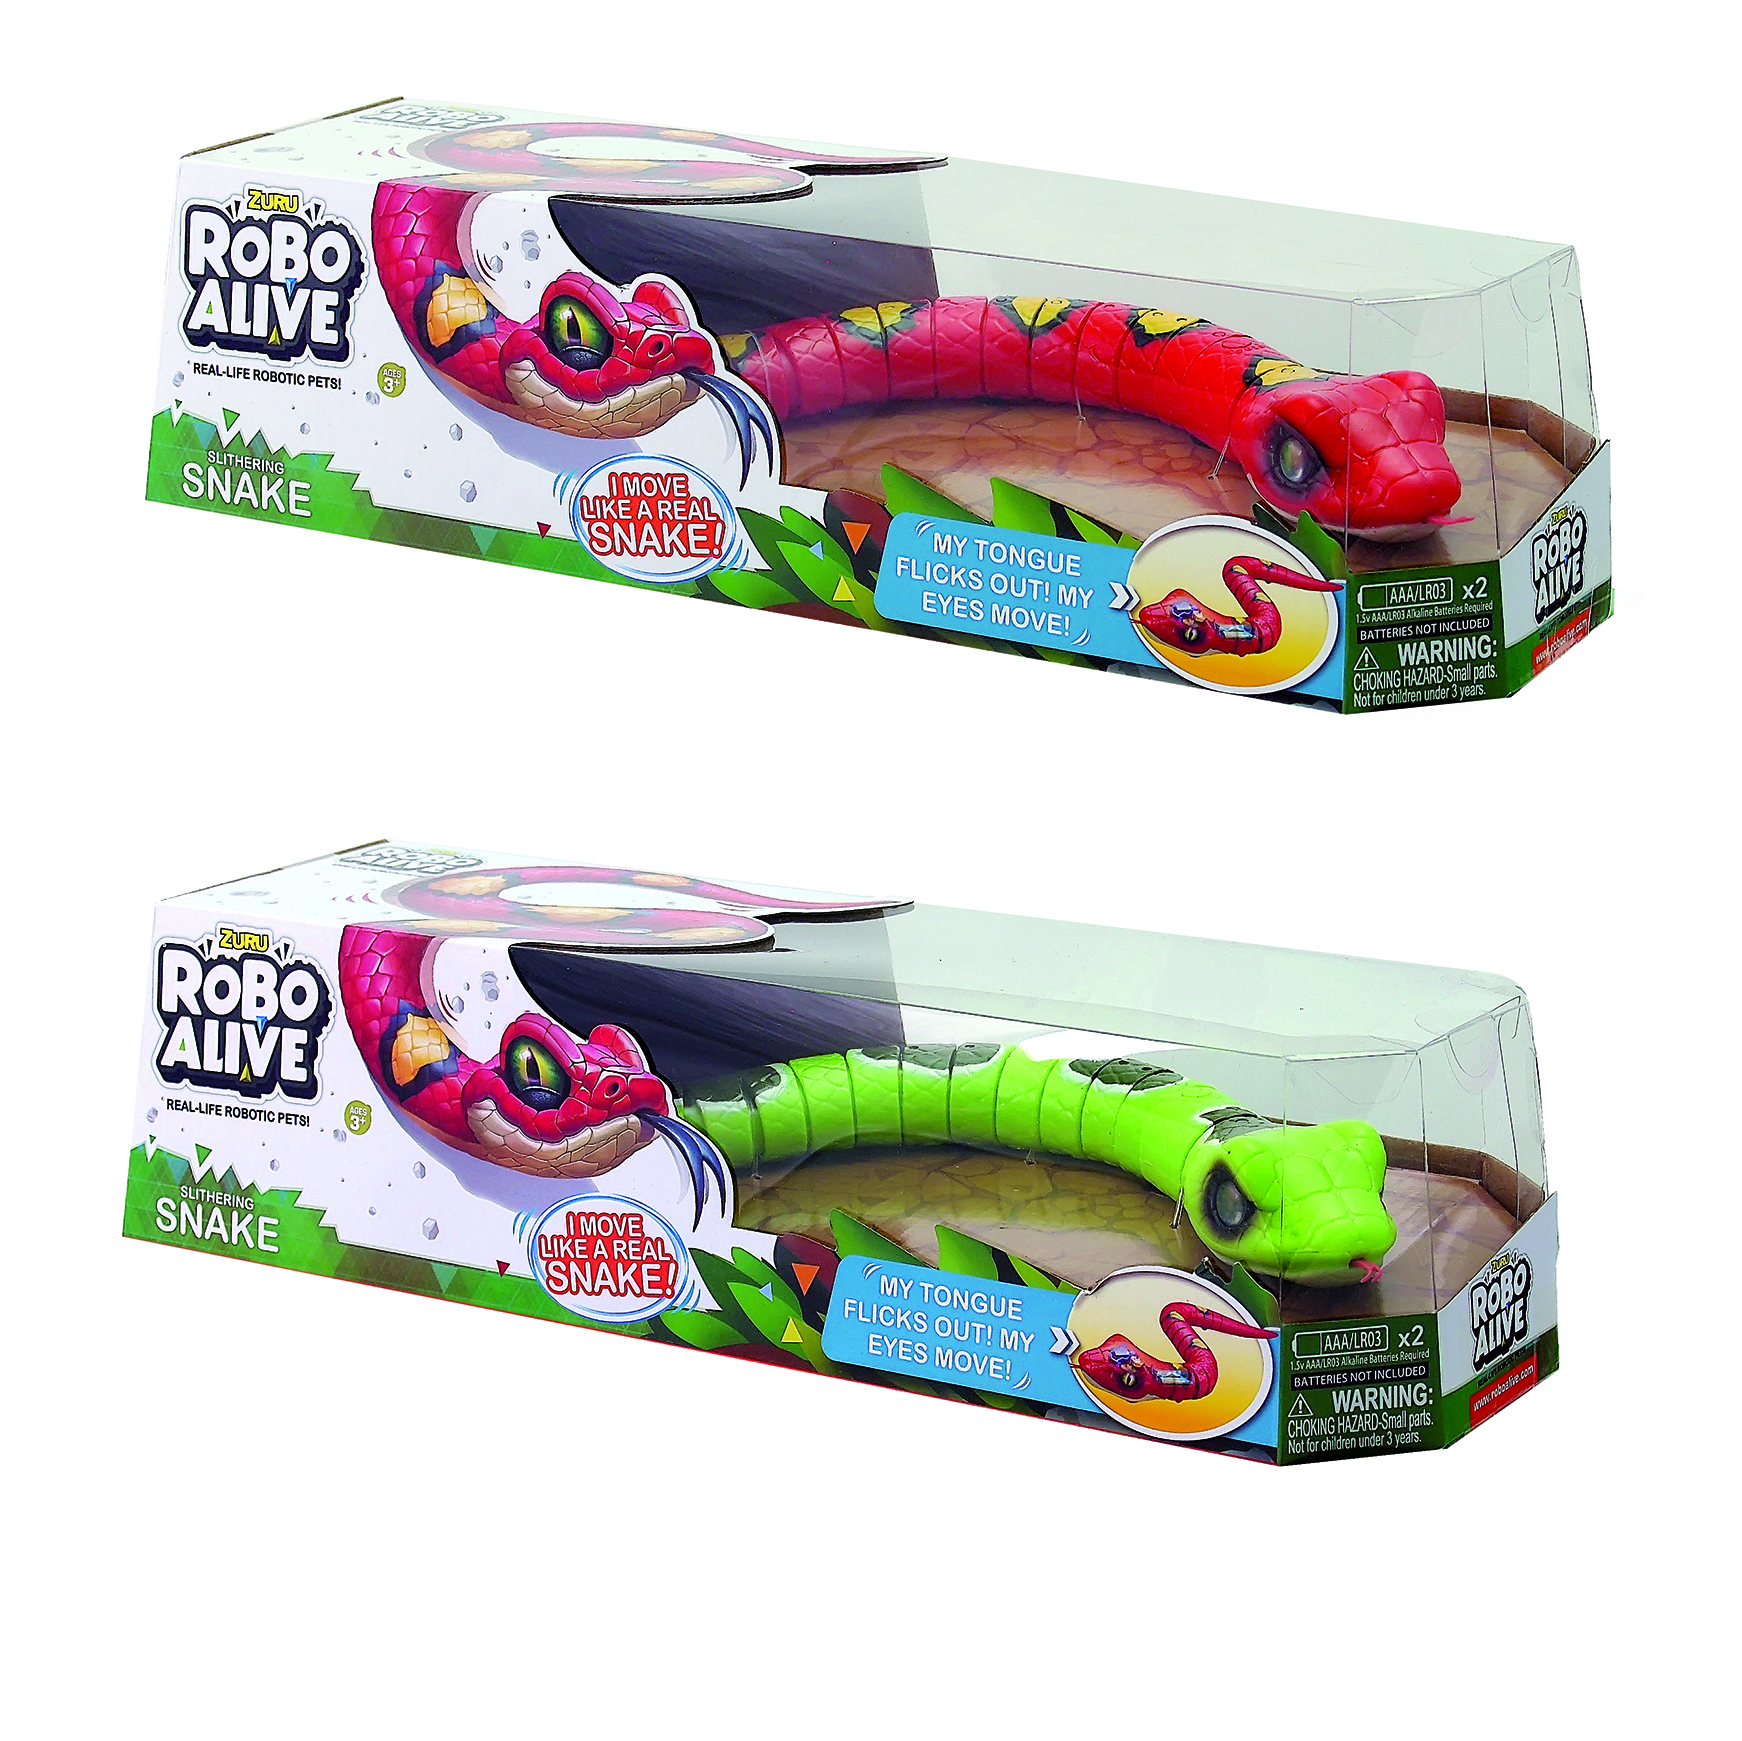 ROBO ALIVE REAL LIFE ROBOTIC PETS SNAKE FOR AGES 3+